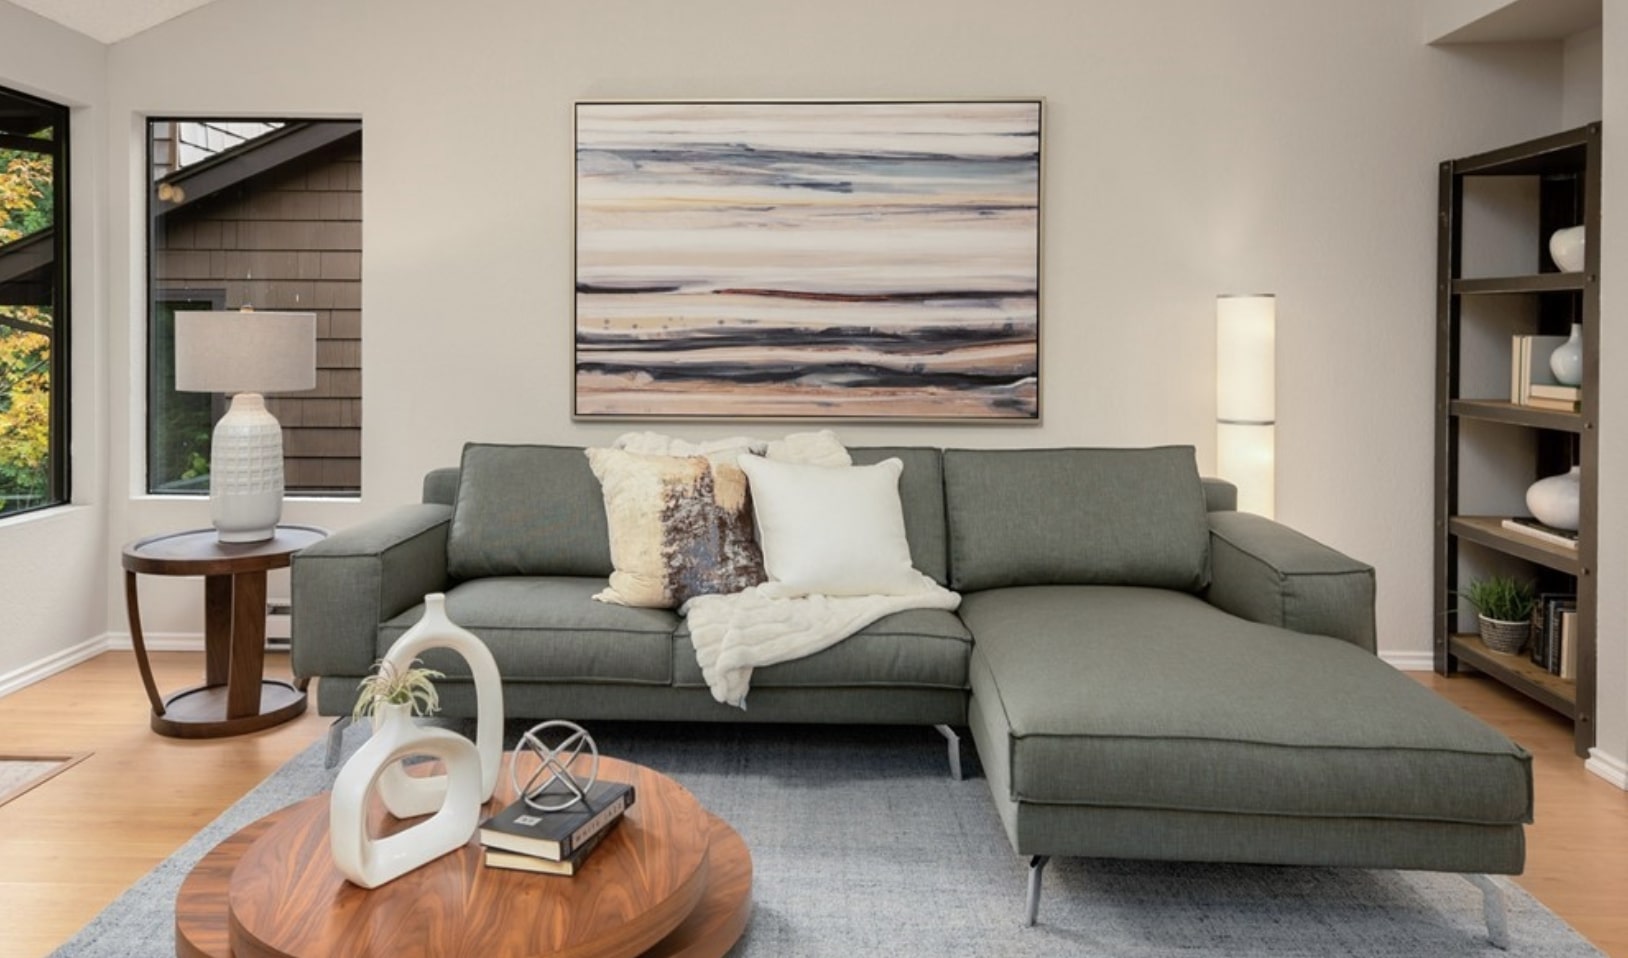 A neutral palette gives this living room a refreshed modern vibe